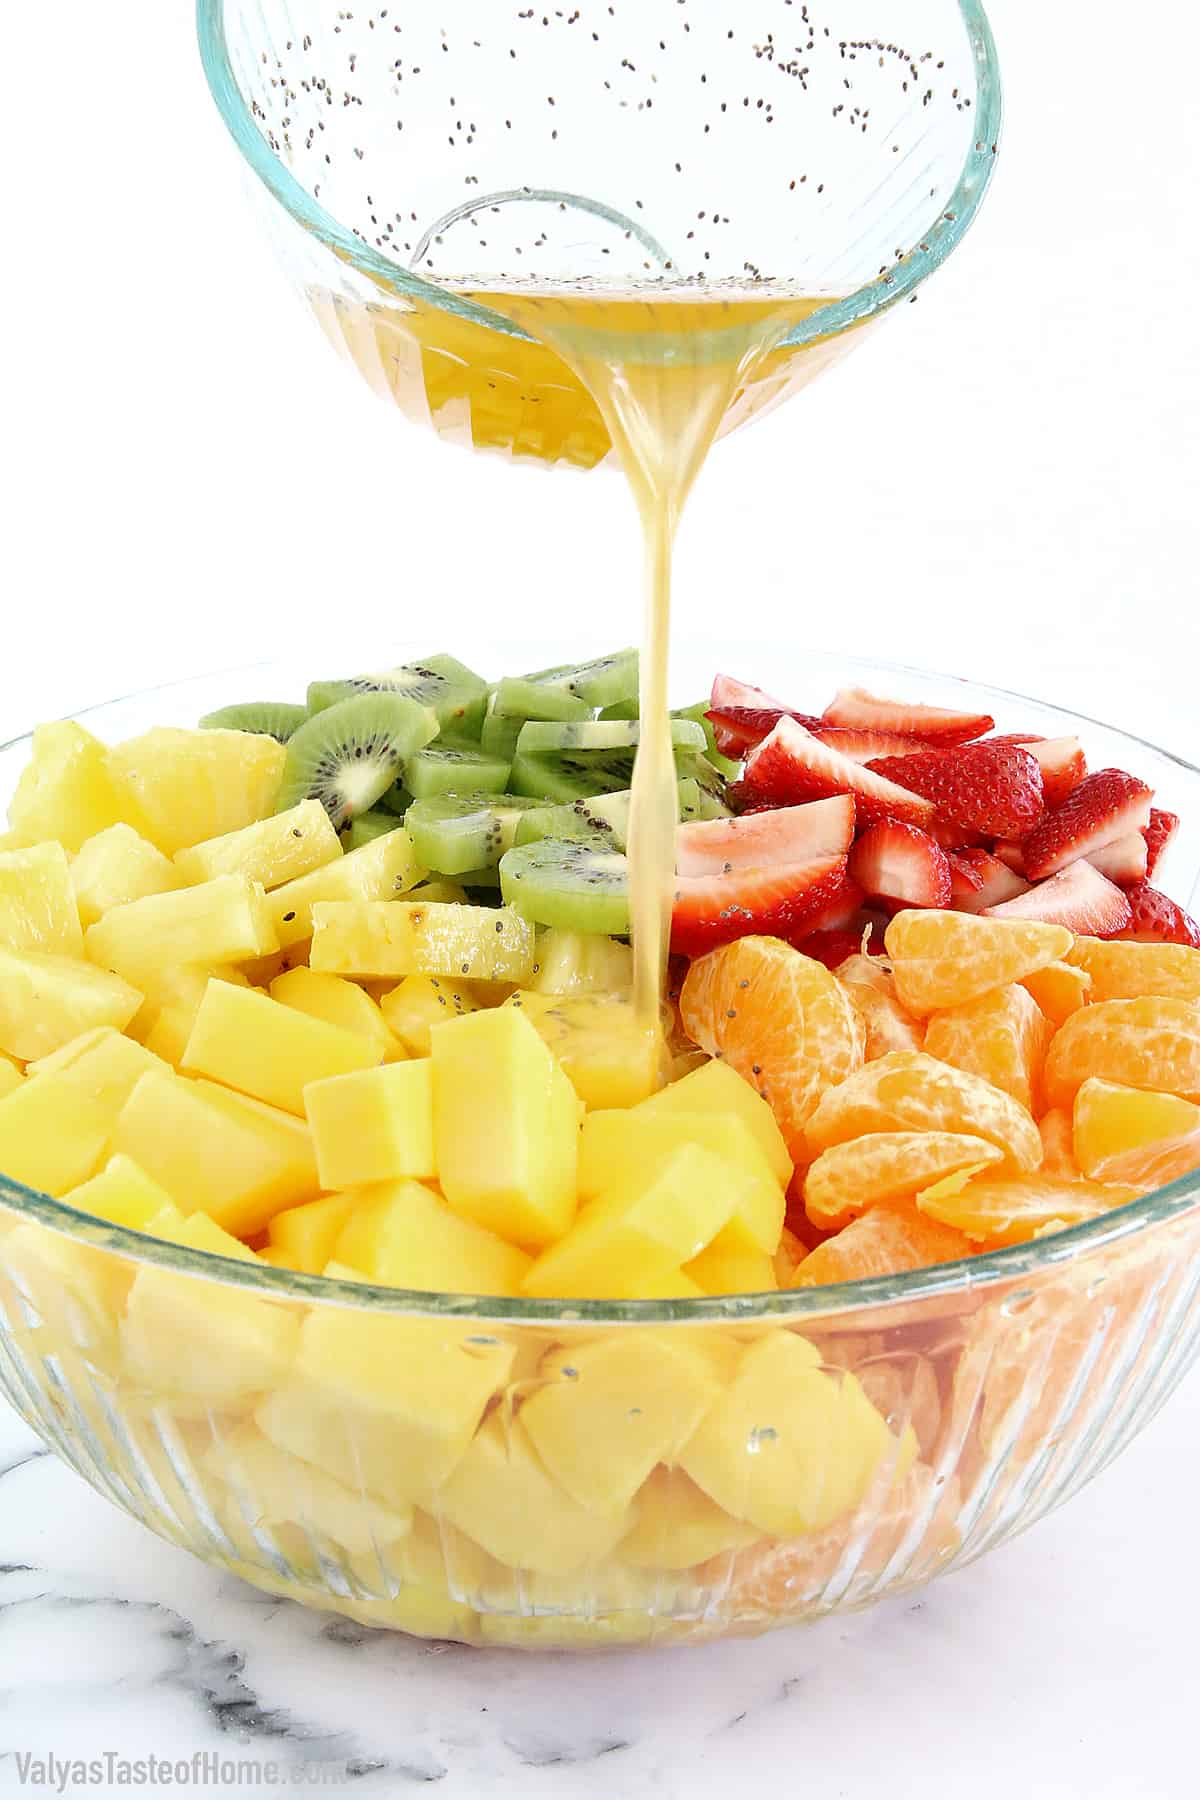 Pour the dressing over the fruit salad.